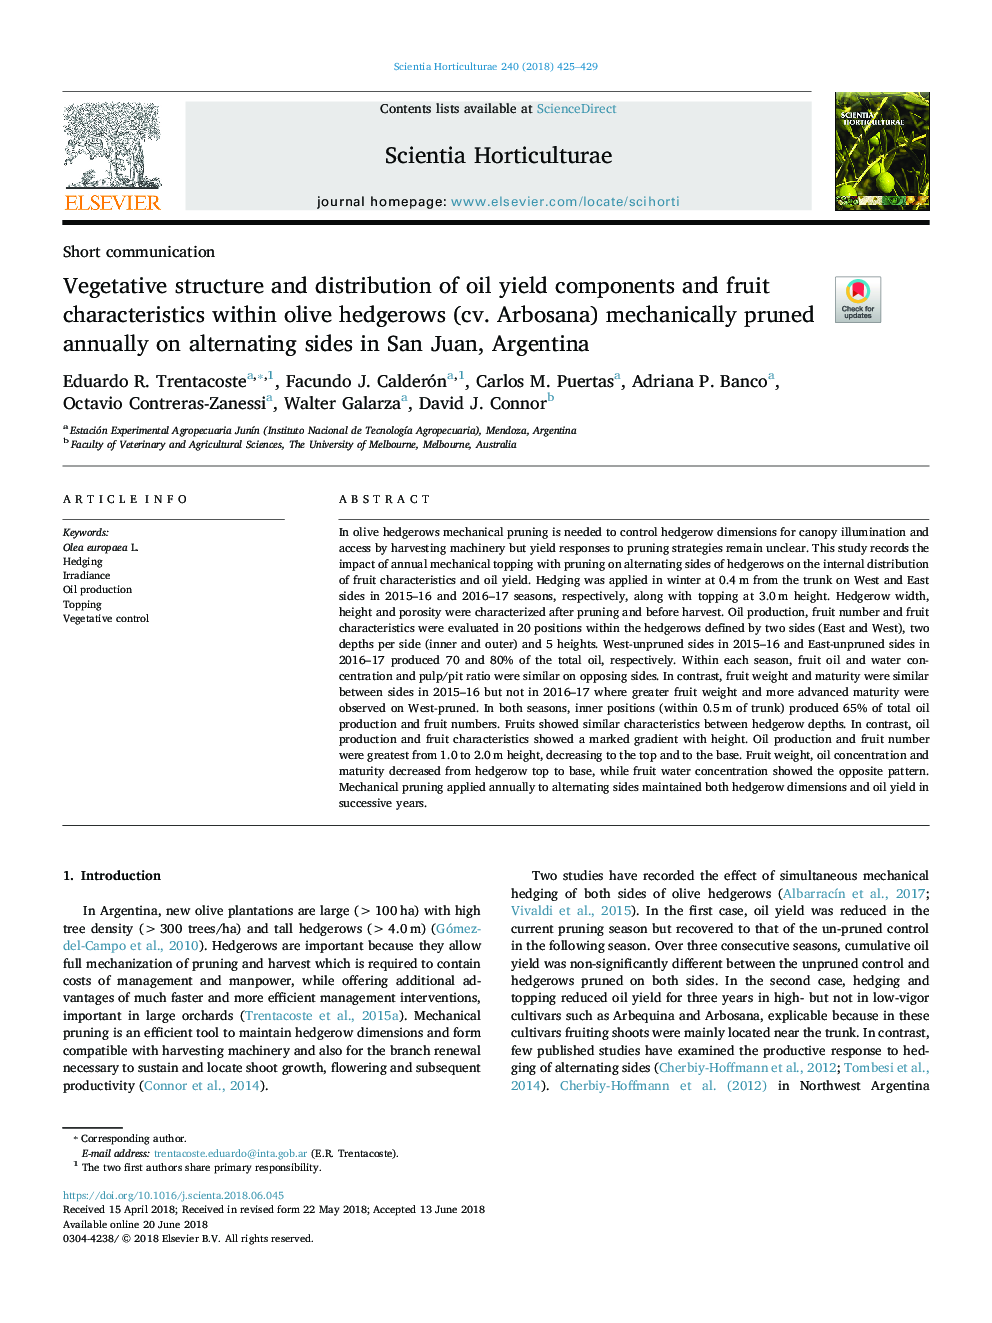 Vegetative structure and distribution of oil yield components and fruit characteristics within olive hedgerows (cv. Arbosana) mechanically pruned annually on alternating sides in San Juan, Argentina